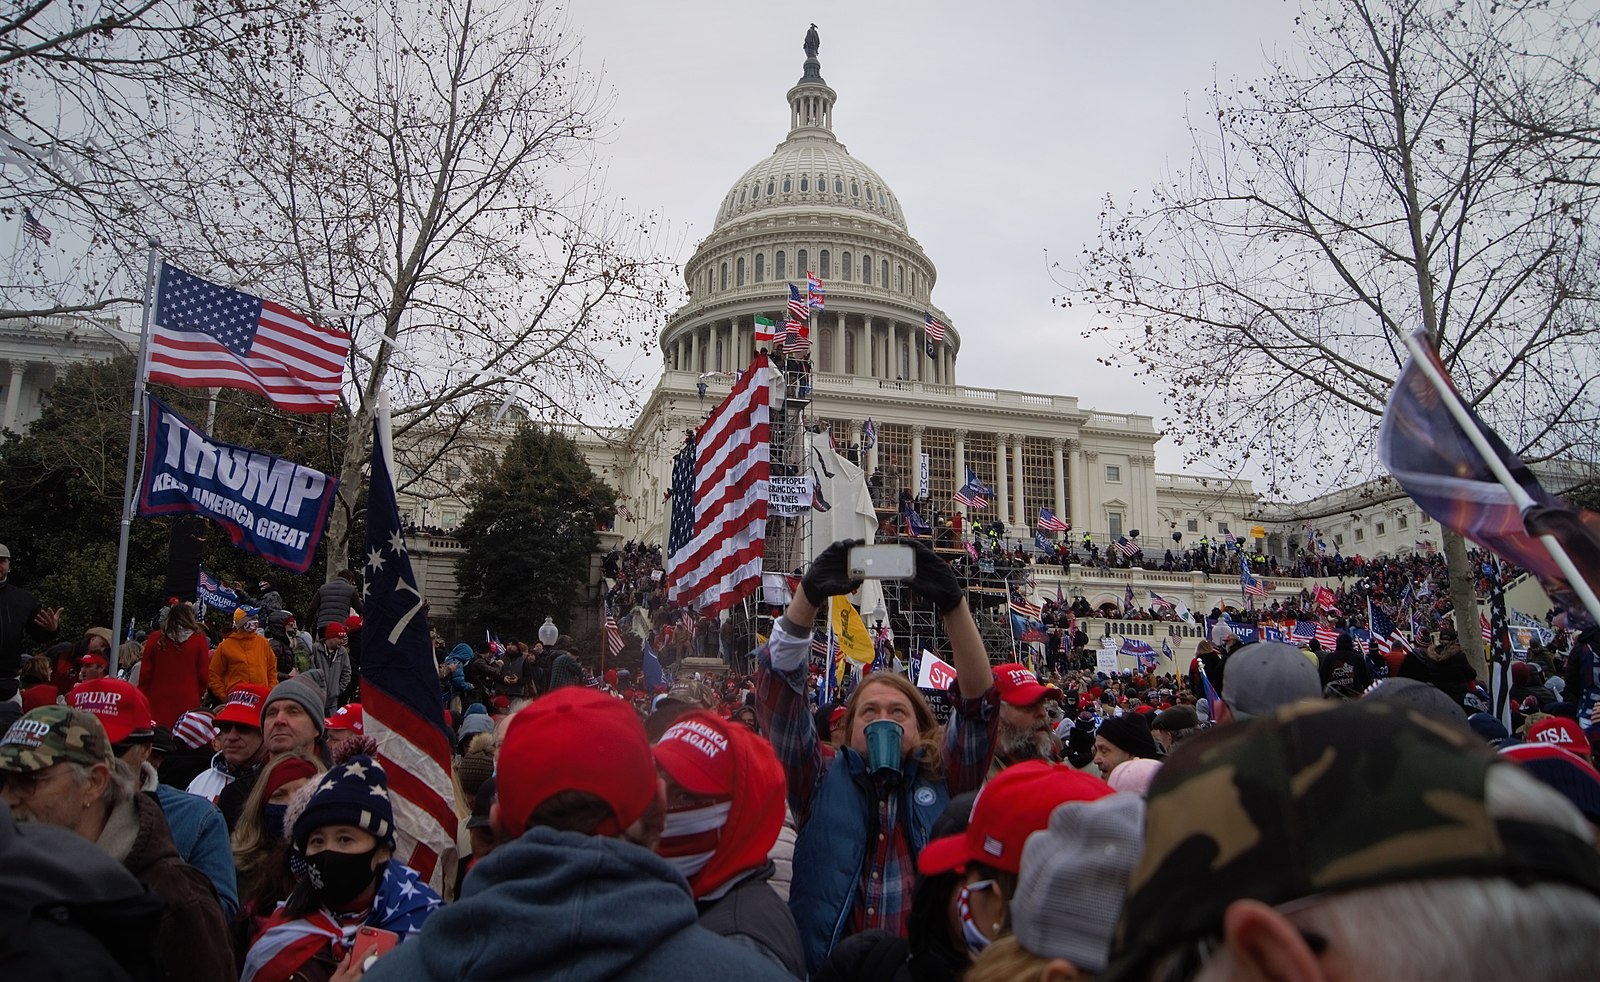 Photograph taken on January 6, 2021 of a large crowd rushing towards the U.S. Capitol, many of them waving banners or wearing hats with the messages "Trump" or "Make America Great Again."